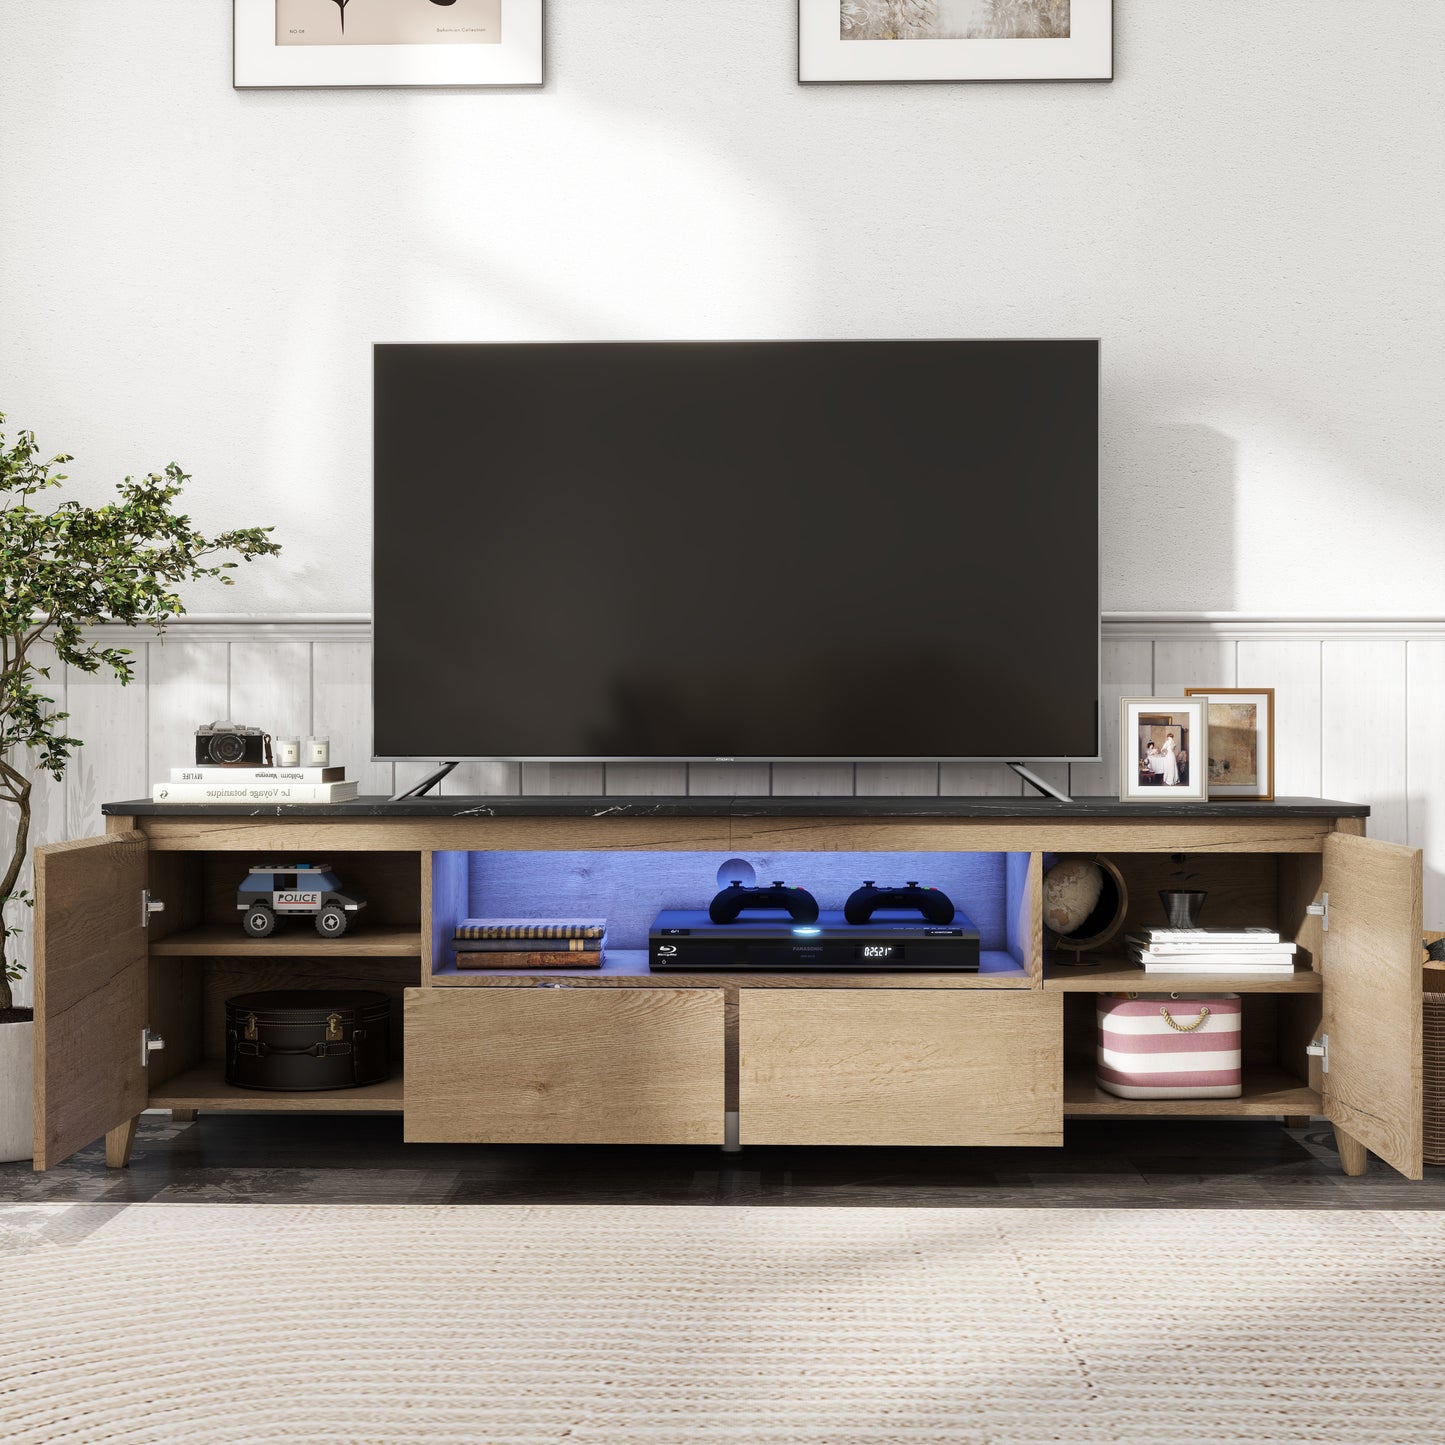 70 Inches Modern TV stand with LED Lights Entertainment Center TV cabinet with Storage for Up to 80 inch for Gaming Living Room Bedroom